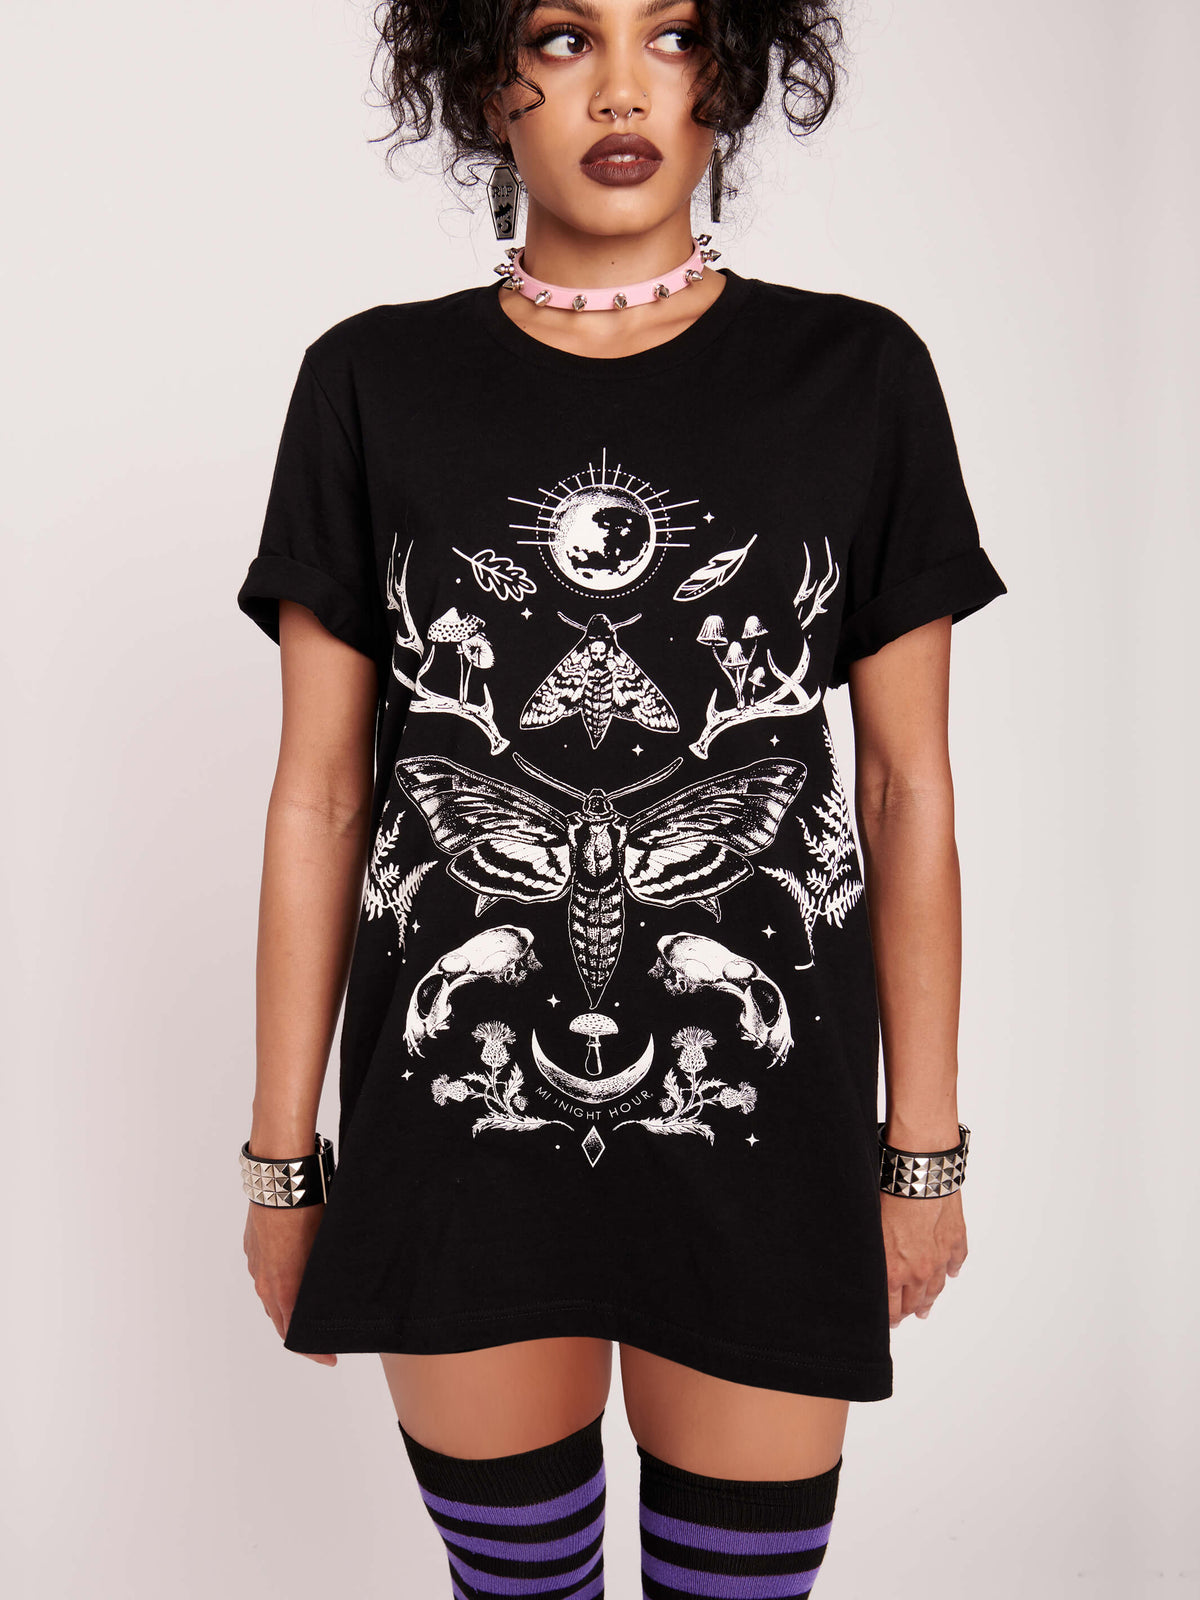 Conjure up the spirits in this soft forest witch 100% cotton t-shirt. witchy, Goth fashion, alt girl fashion, goth clothing, goth top , witchy clothing, egirl fashion, gothic fashion, dark aesthetic.